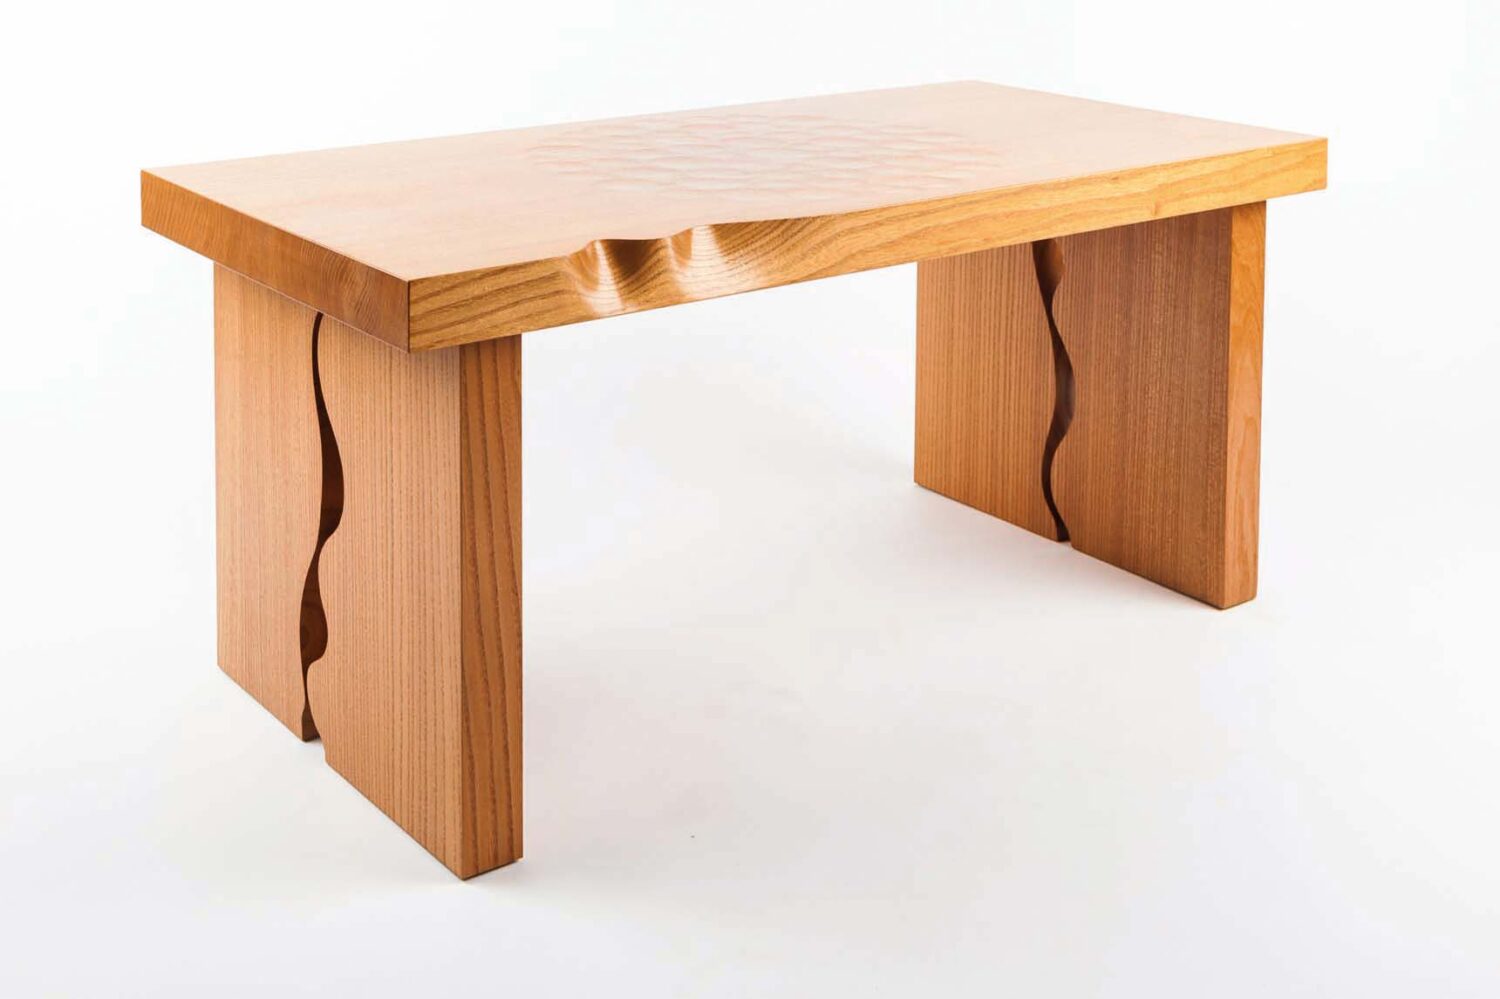 A table by David Savage wiht one live edge and subtle scallops on top